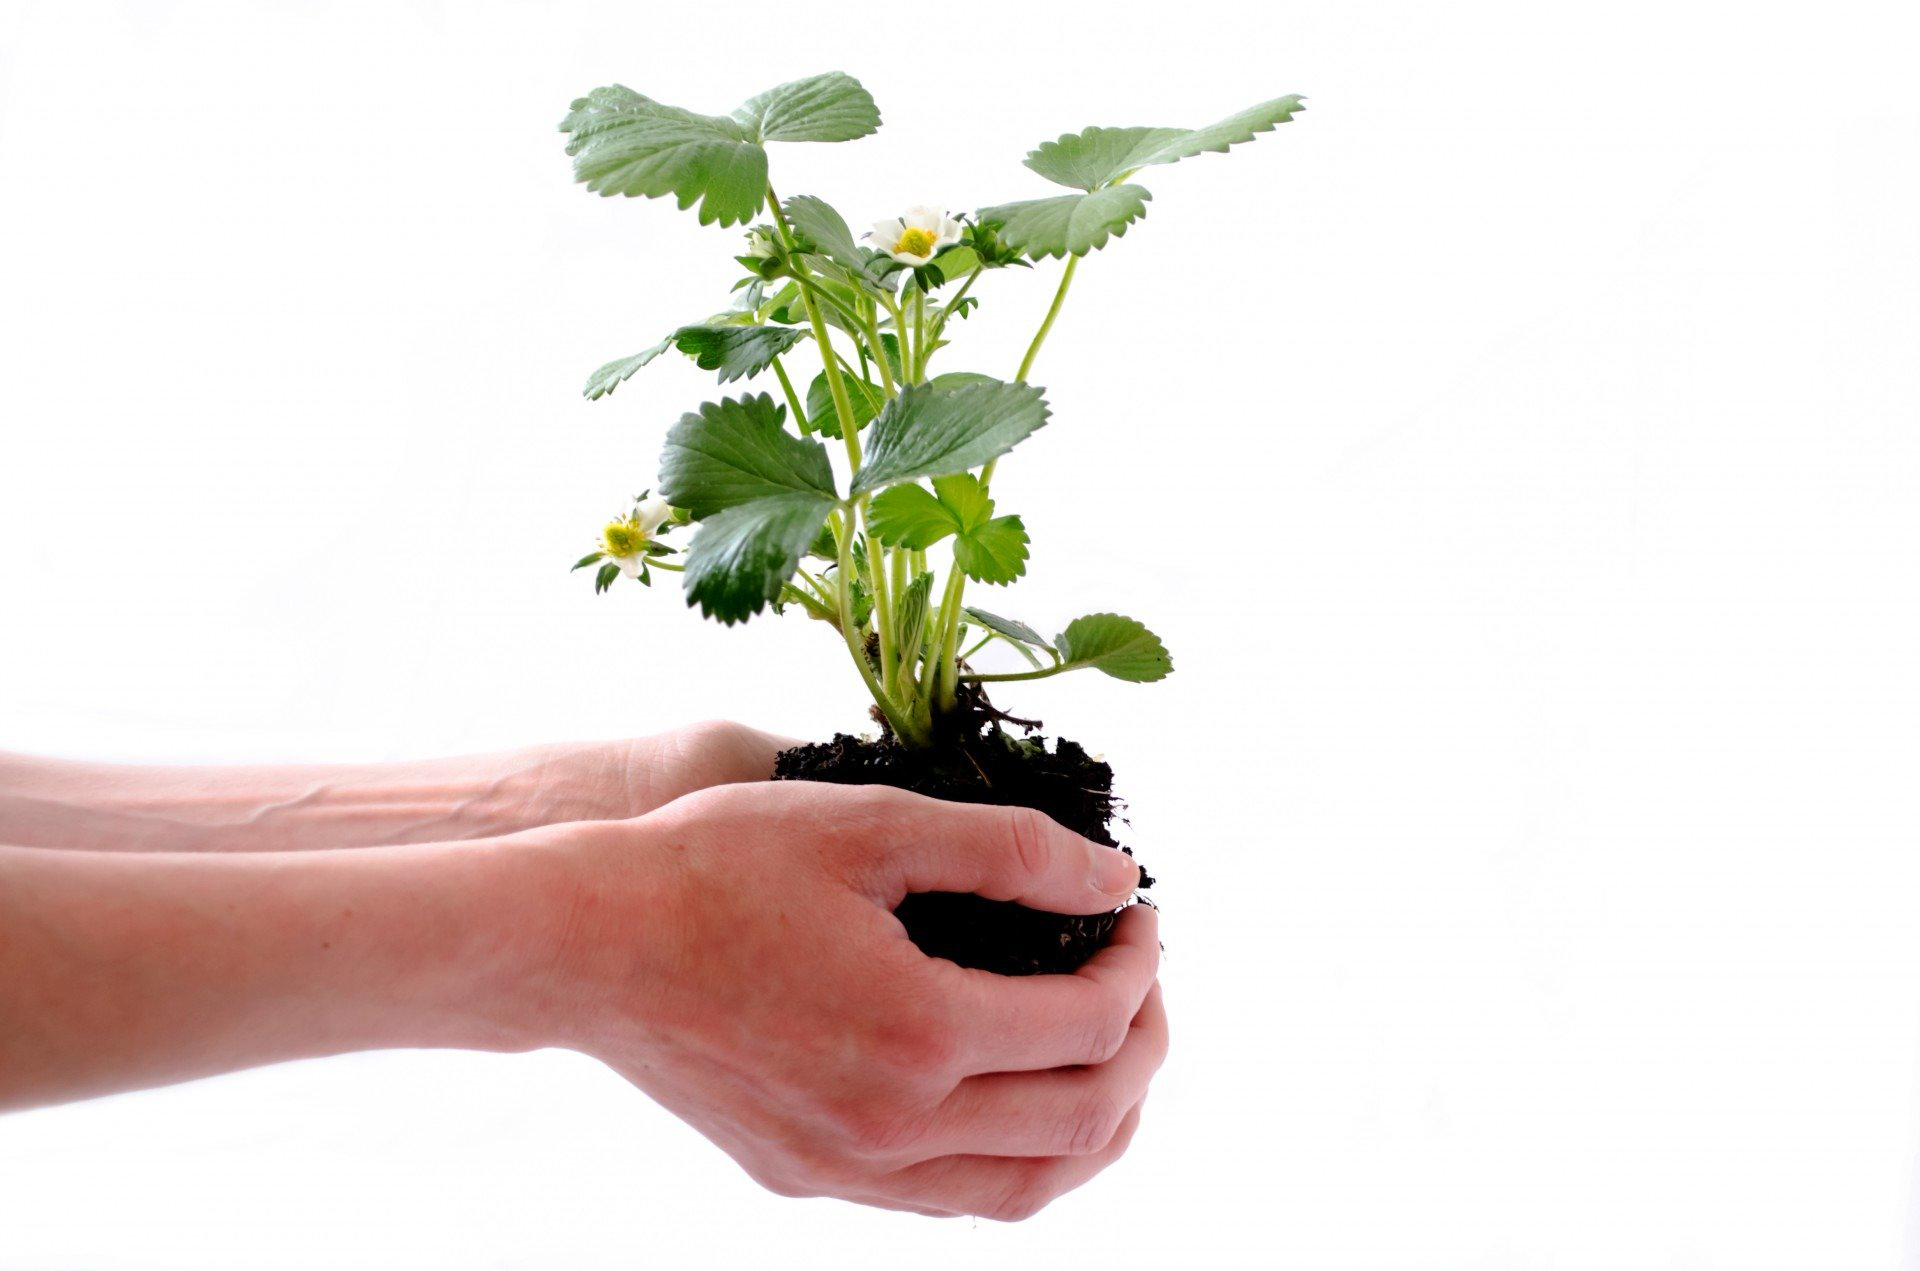 A pair of hands holding a plant in soil